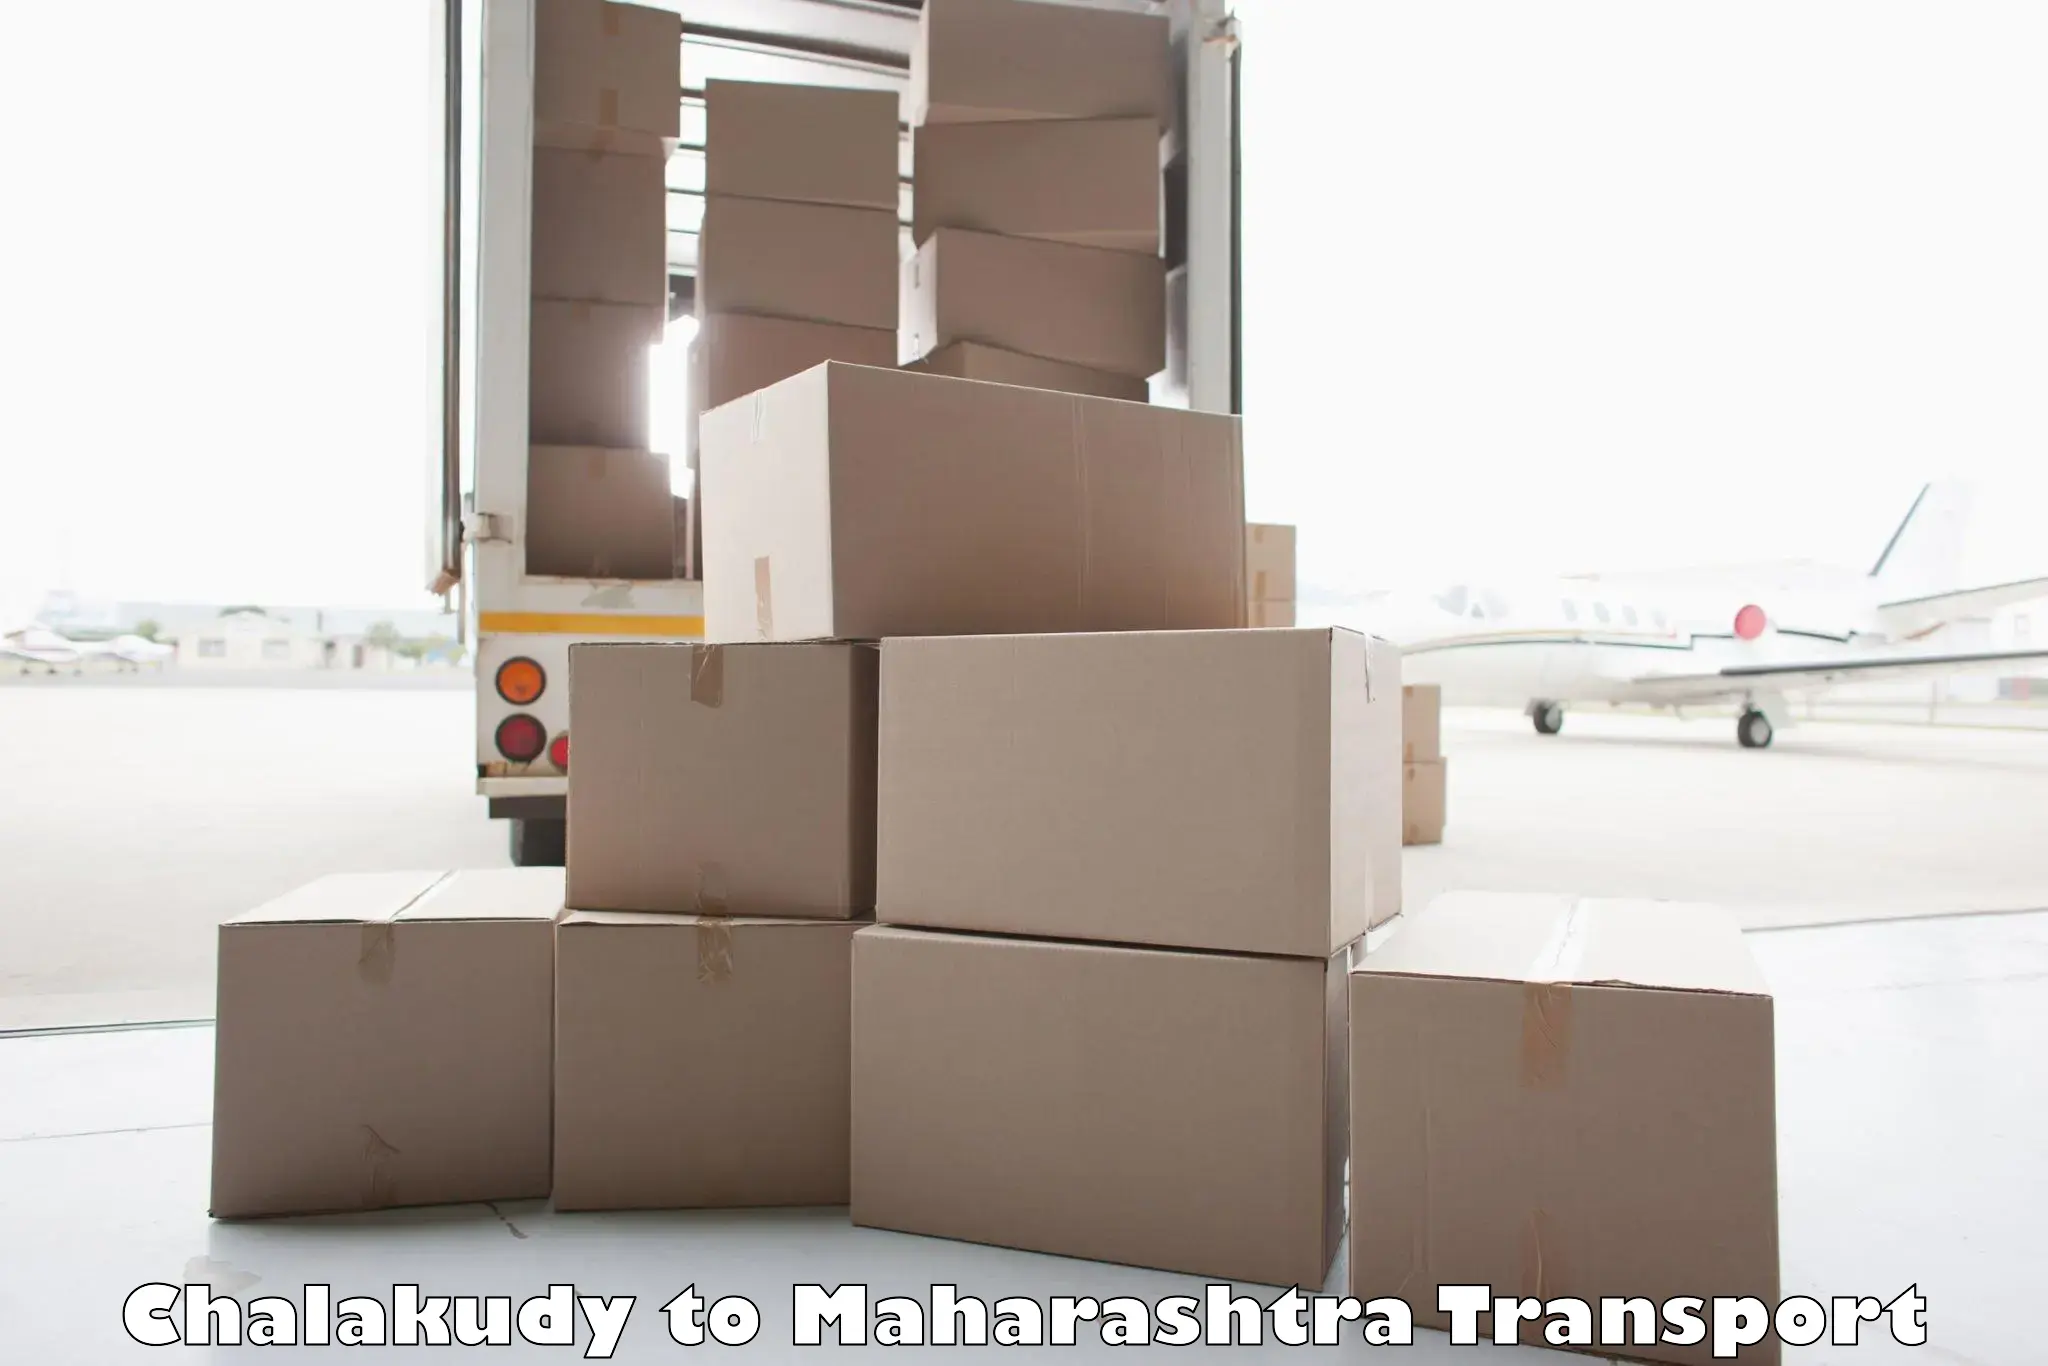 Road transport online services Chalakudy to Mahabaleshwar